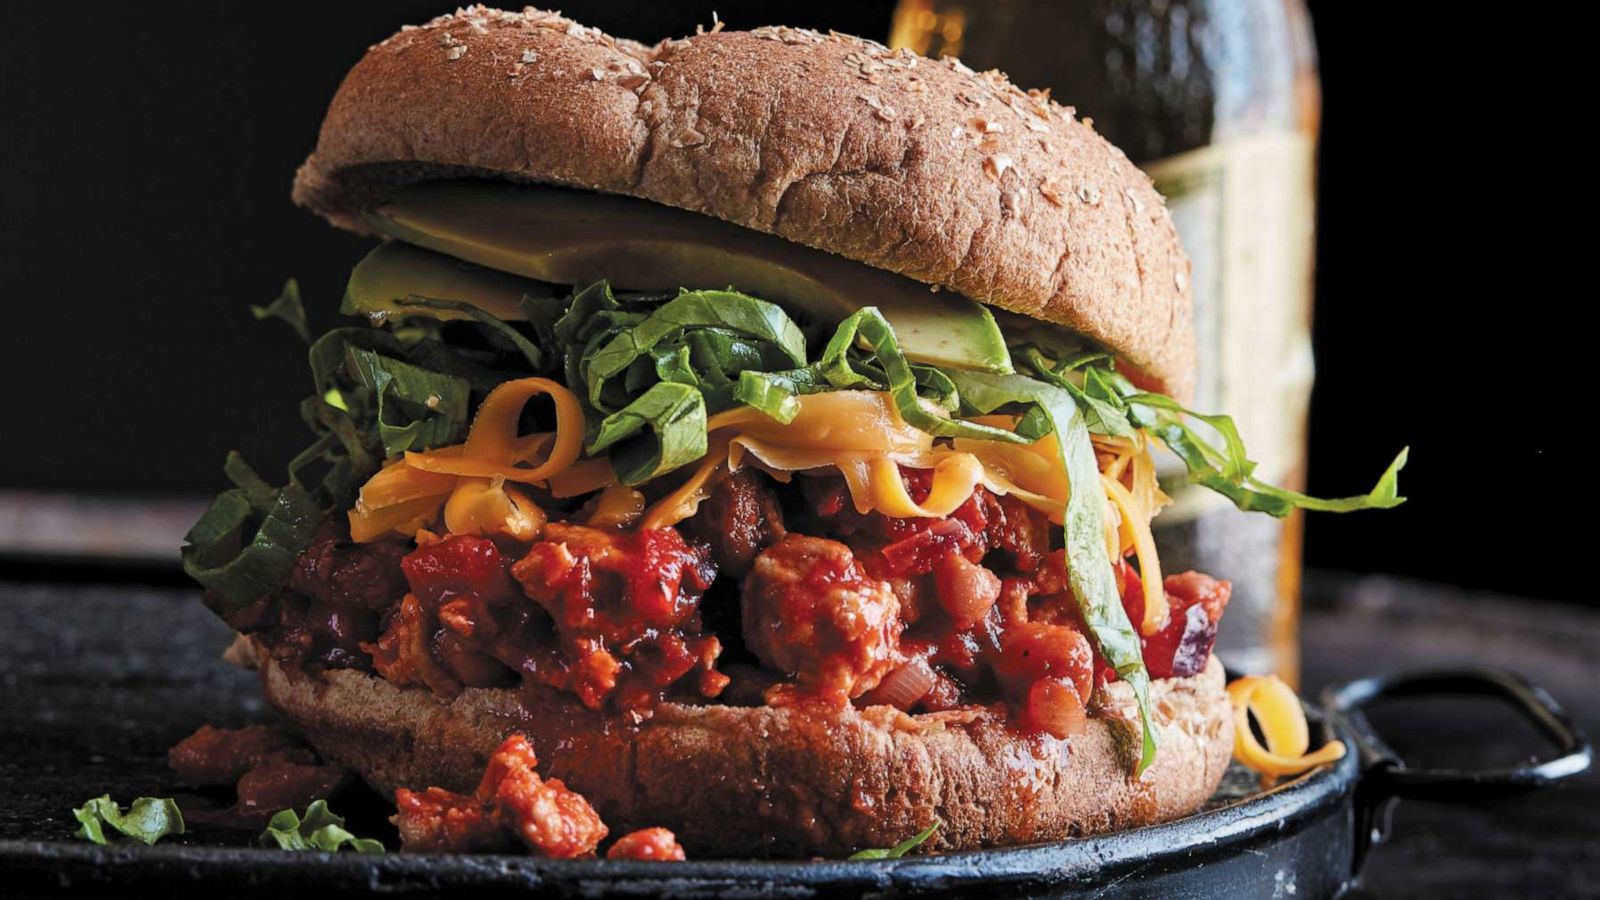 PHOTO: Ultimate Sloppy Joe from chef Serena Wolf